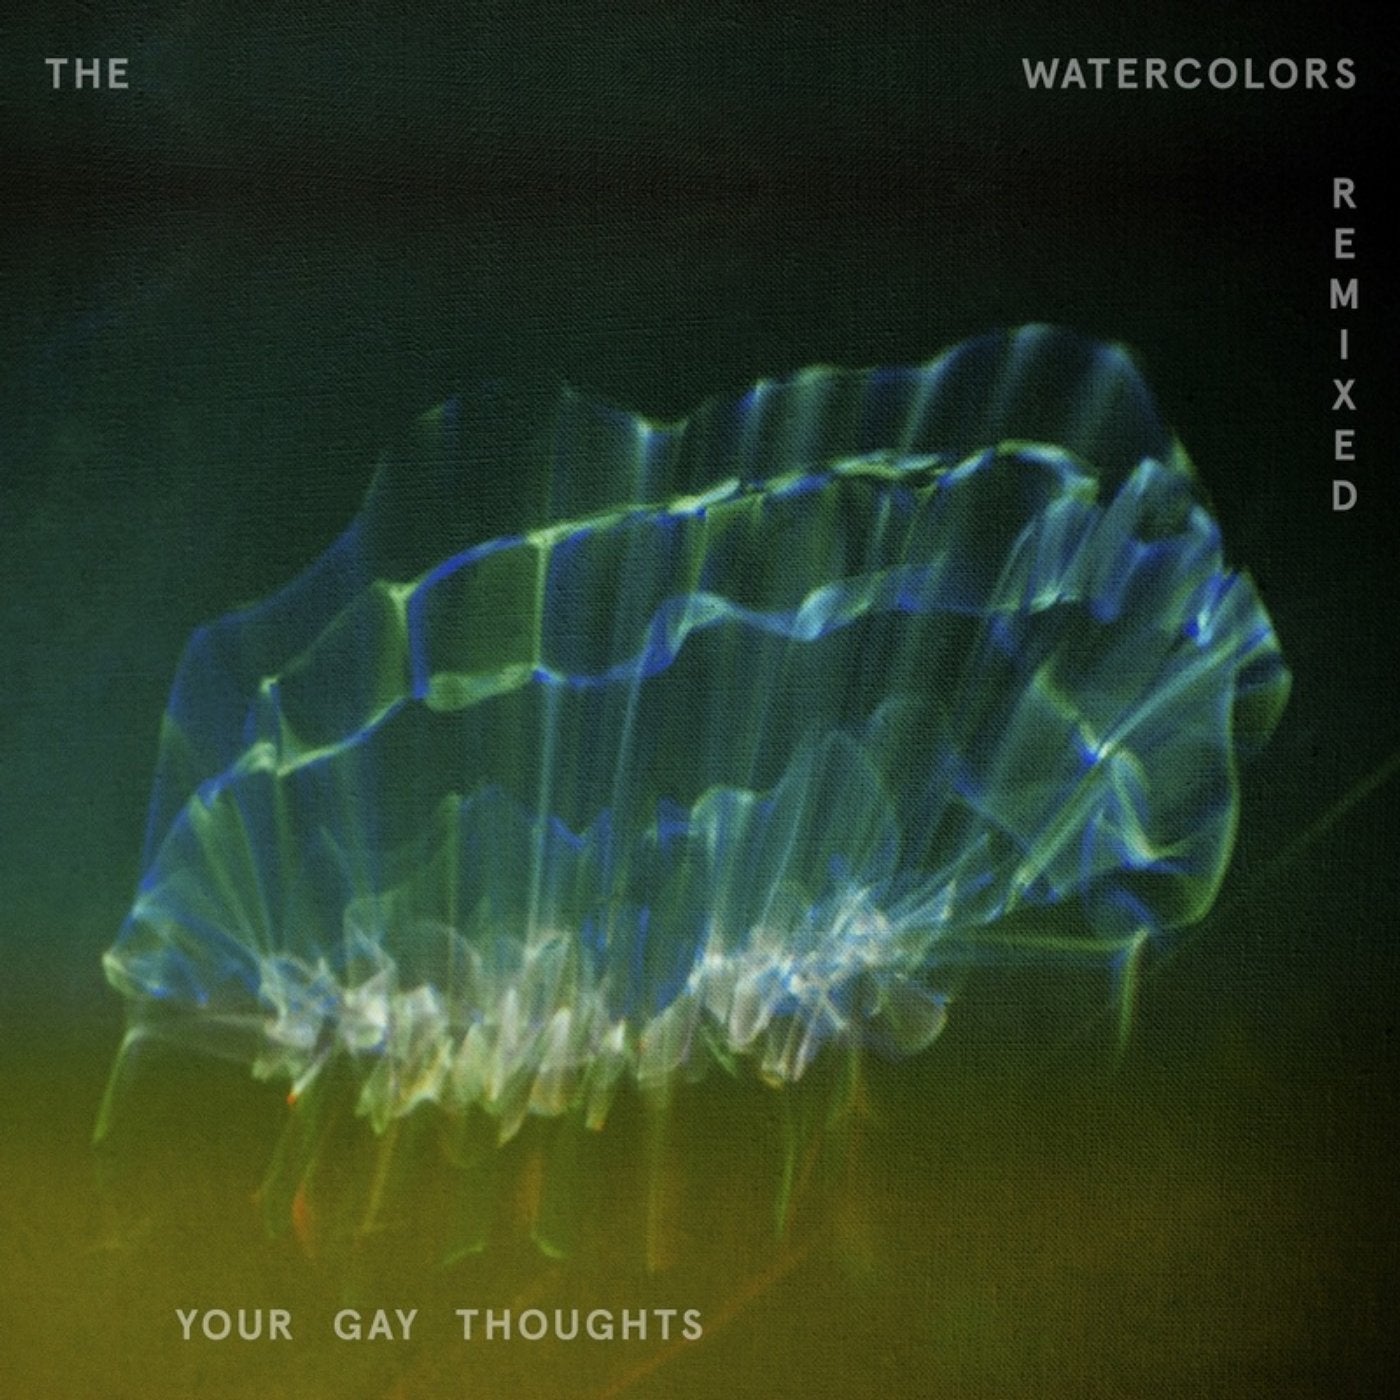 The Watercolors Remixed